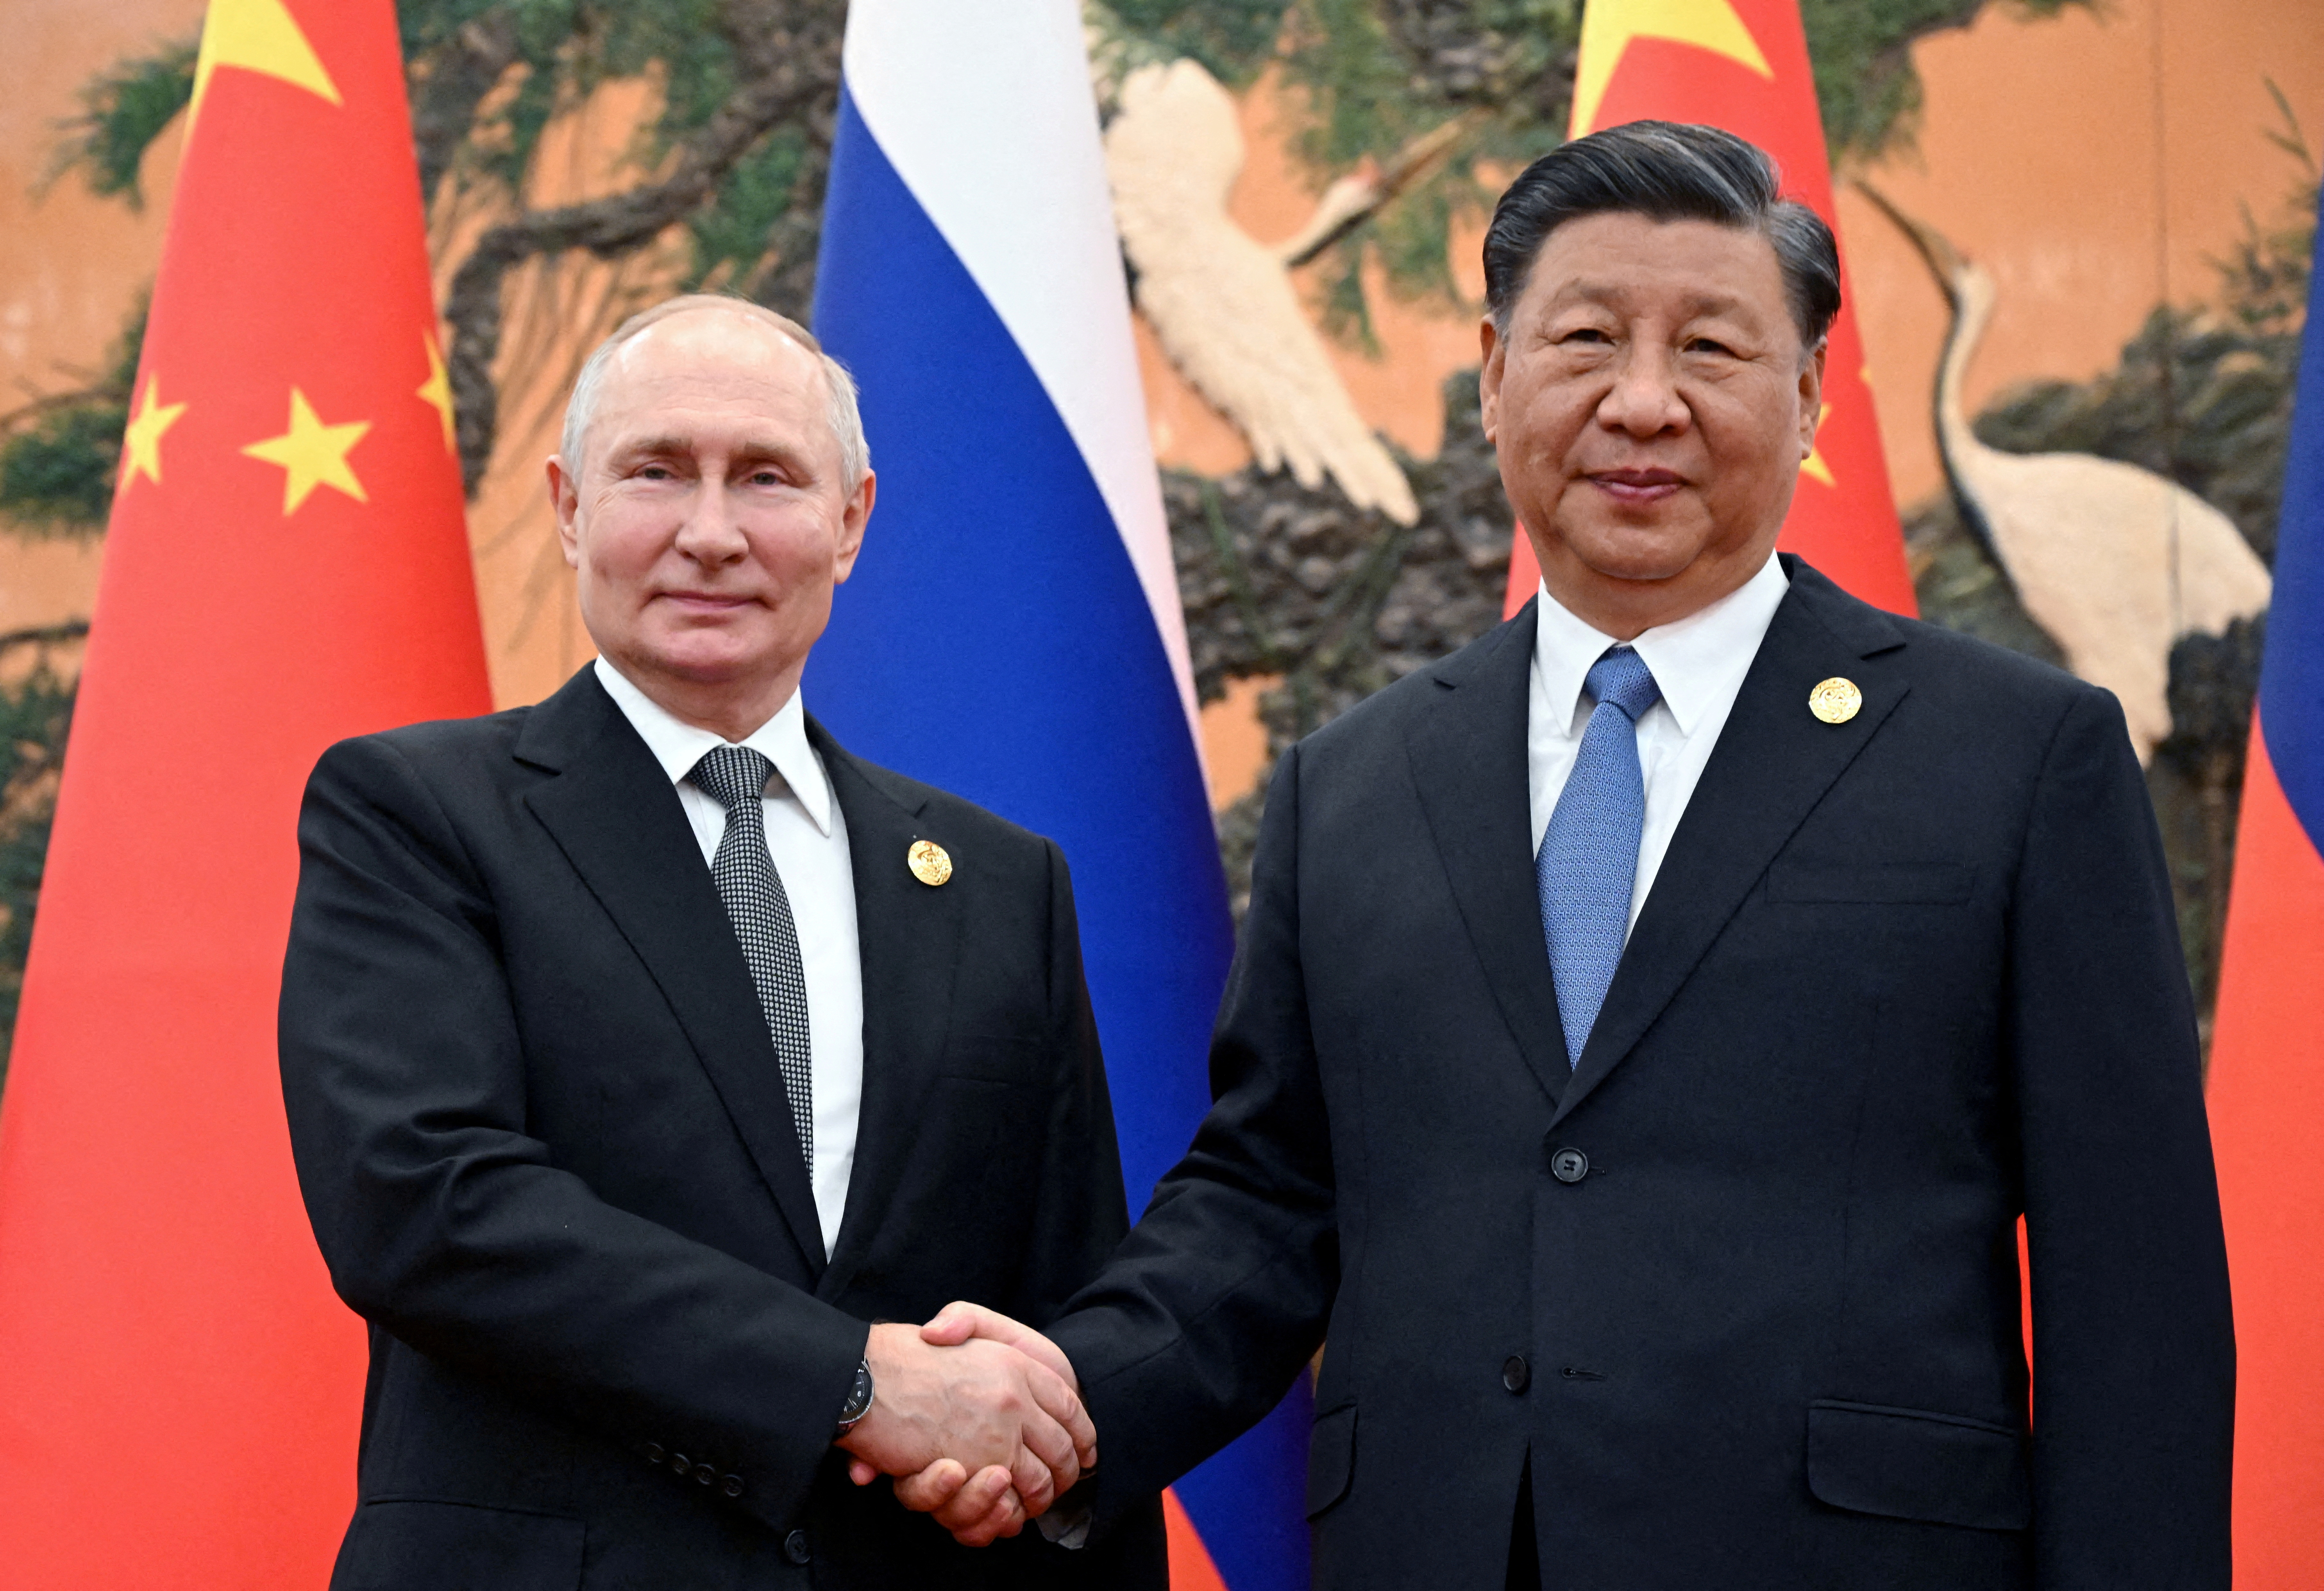 Russian President Vladimir Putin shakes hands with Chinese President Xi Jinping